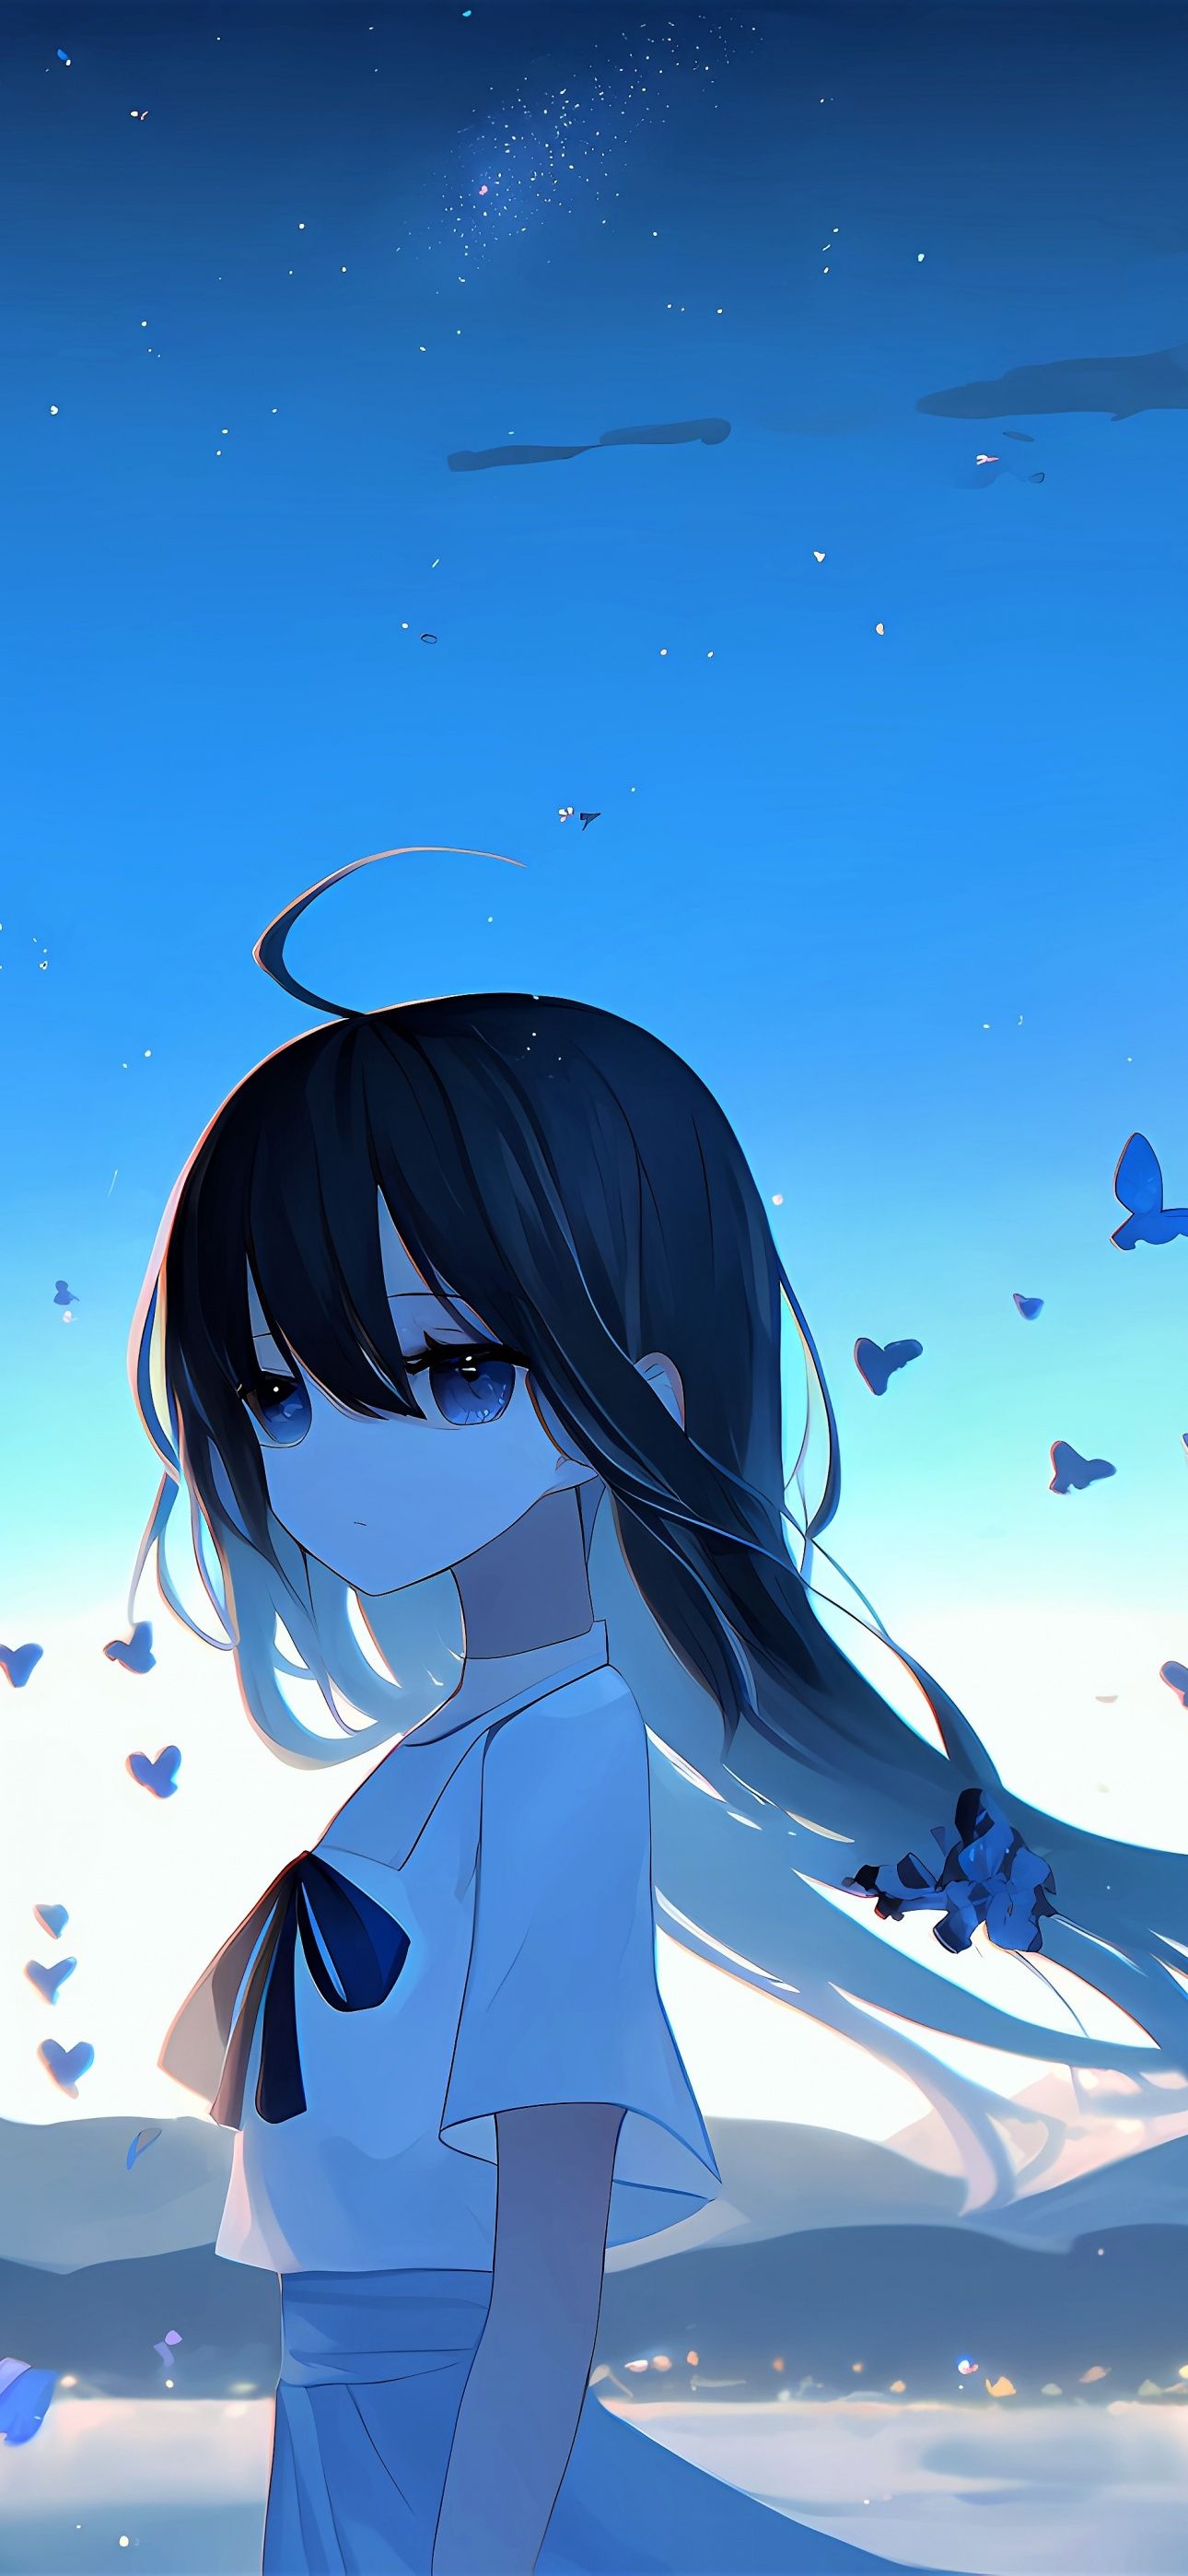 Anime girl with blue eyes and blue butterfly wallpaper - Blue anime